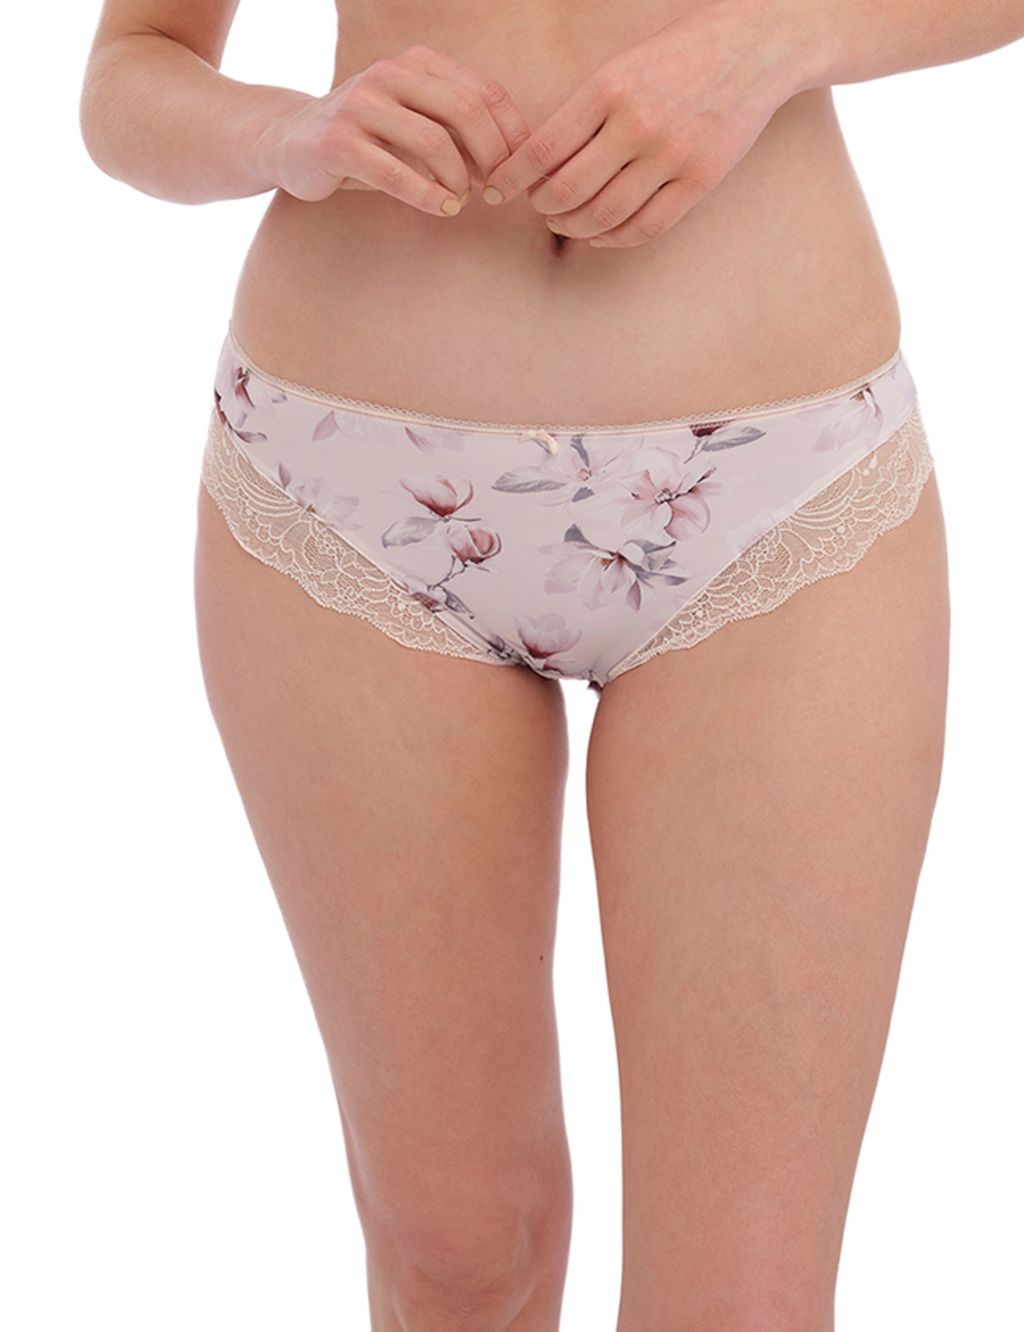 Lucia Lace Floral Knickers image 1